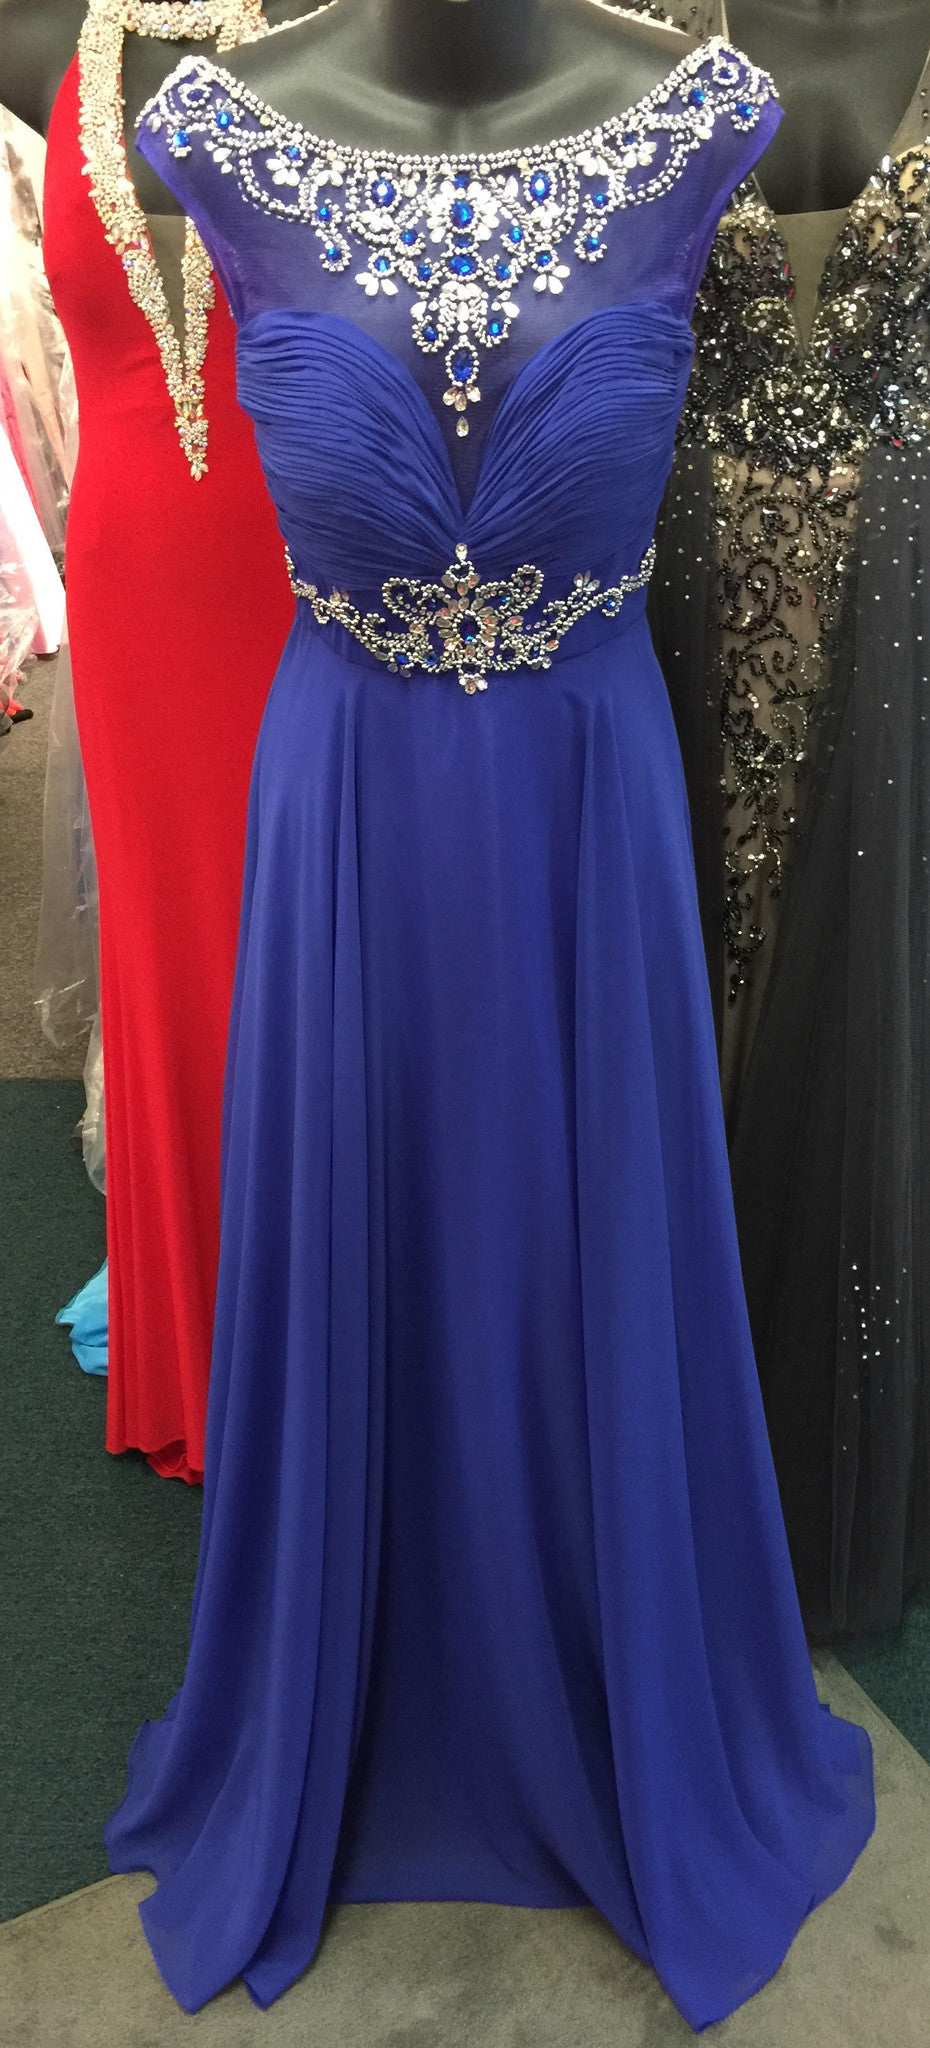 Precious Formals Lux Gal style L 70118 in size 0 Royal blue is a chiffon prom gown with illusion hand beaded top and intricately hand beaded belt and an extra layer of flowing chiffon on the over skirt.  Embellished sheer high neckline evening gown pageant dress. 